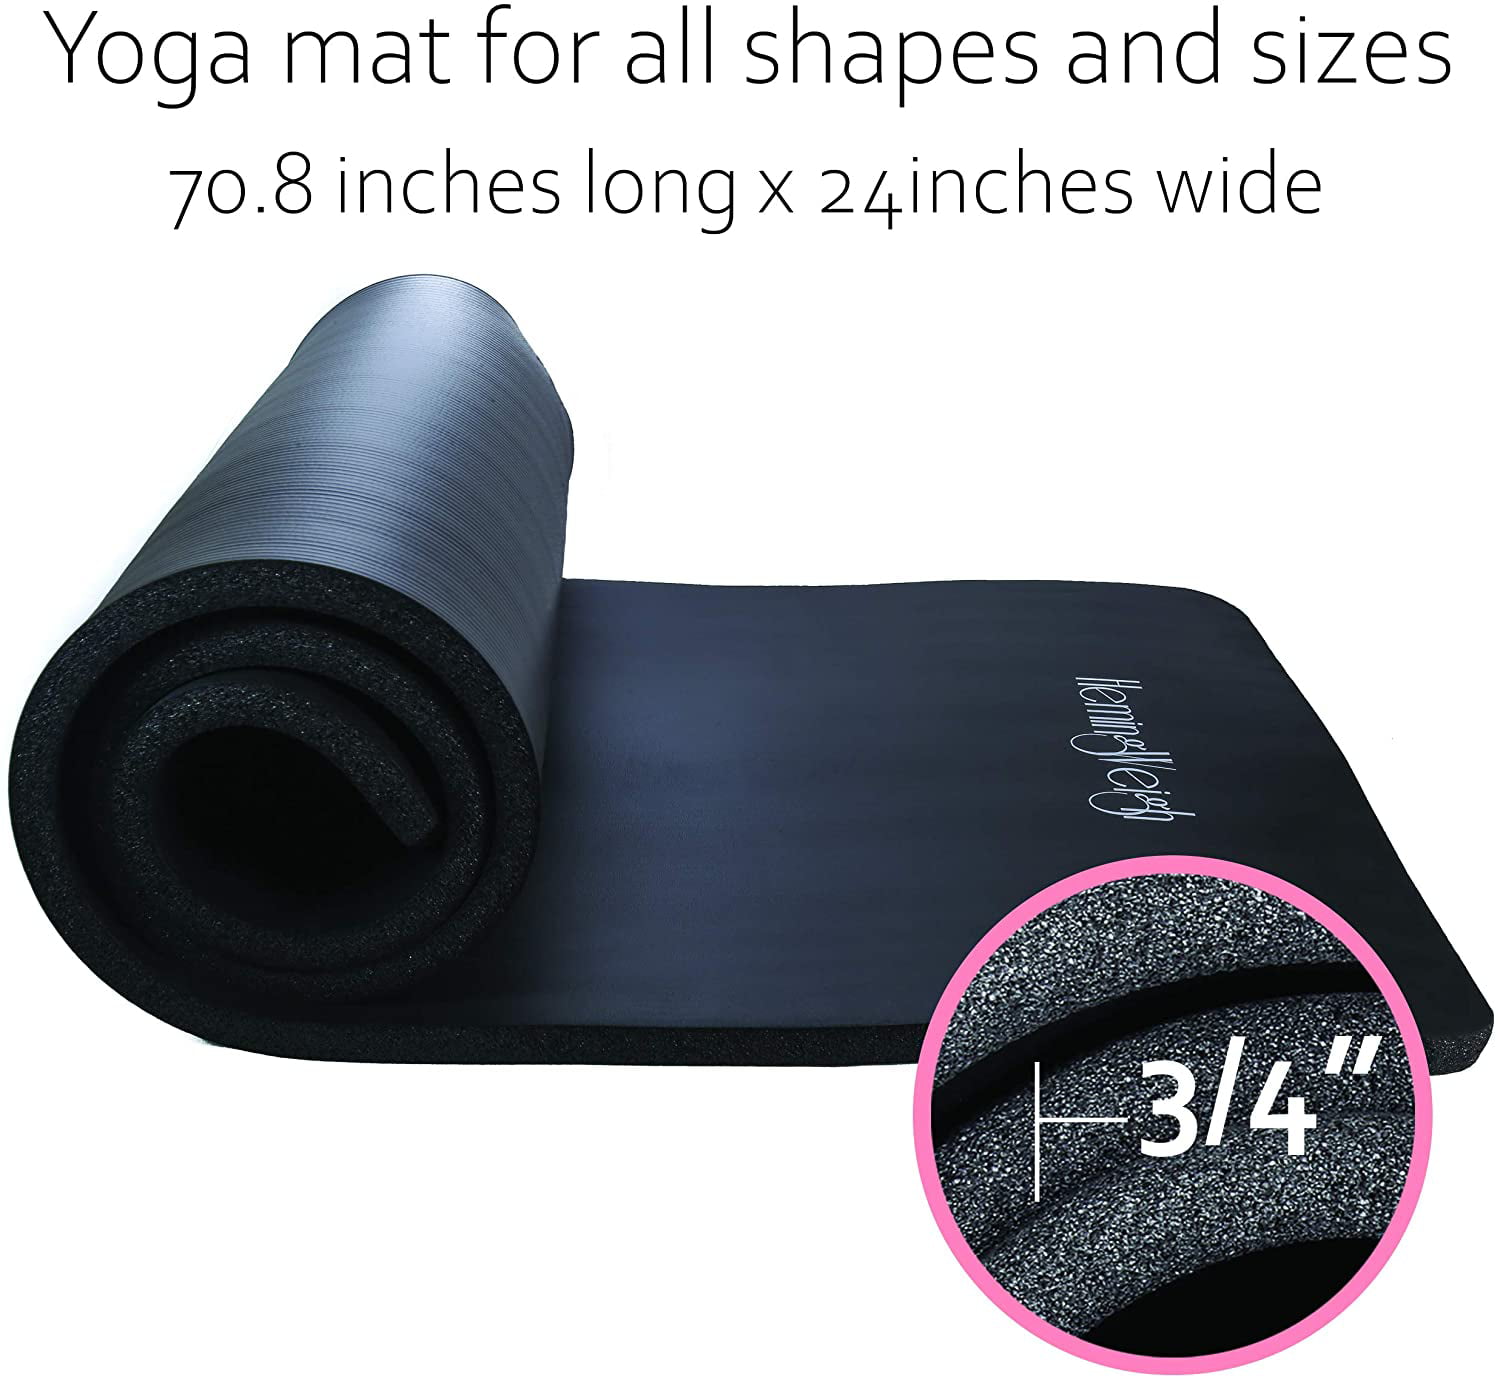 HemingWeigh 1 inch Thick Yoga Mat Extra Thick Non Slip Exercise Mat for Indoo... 